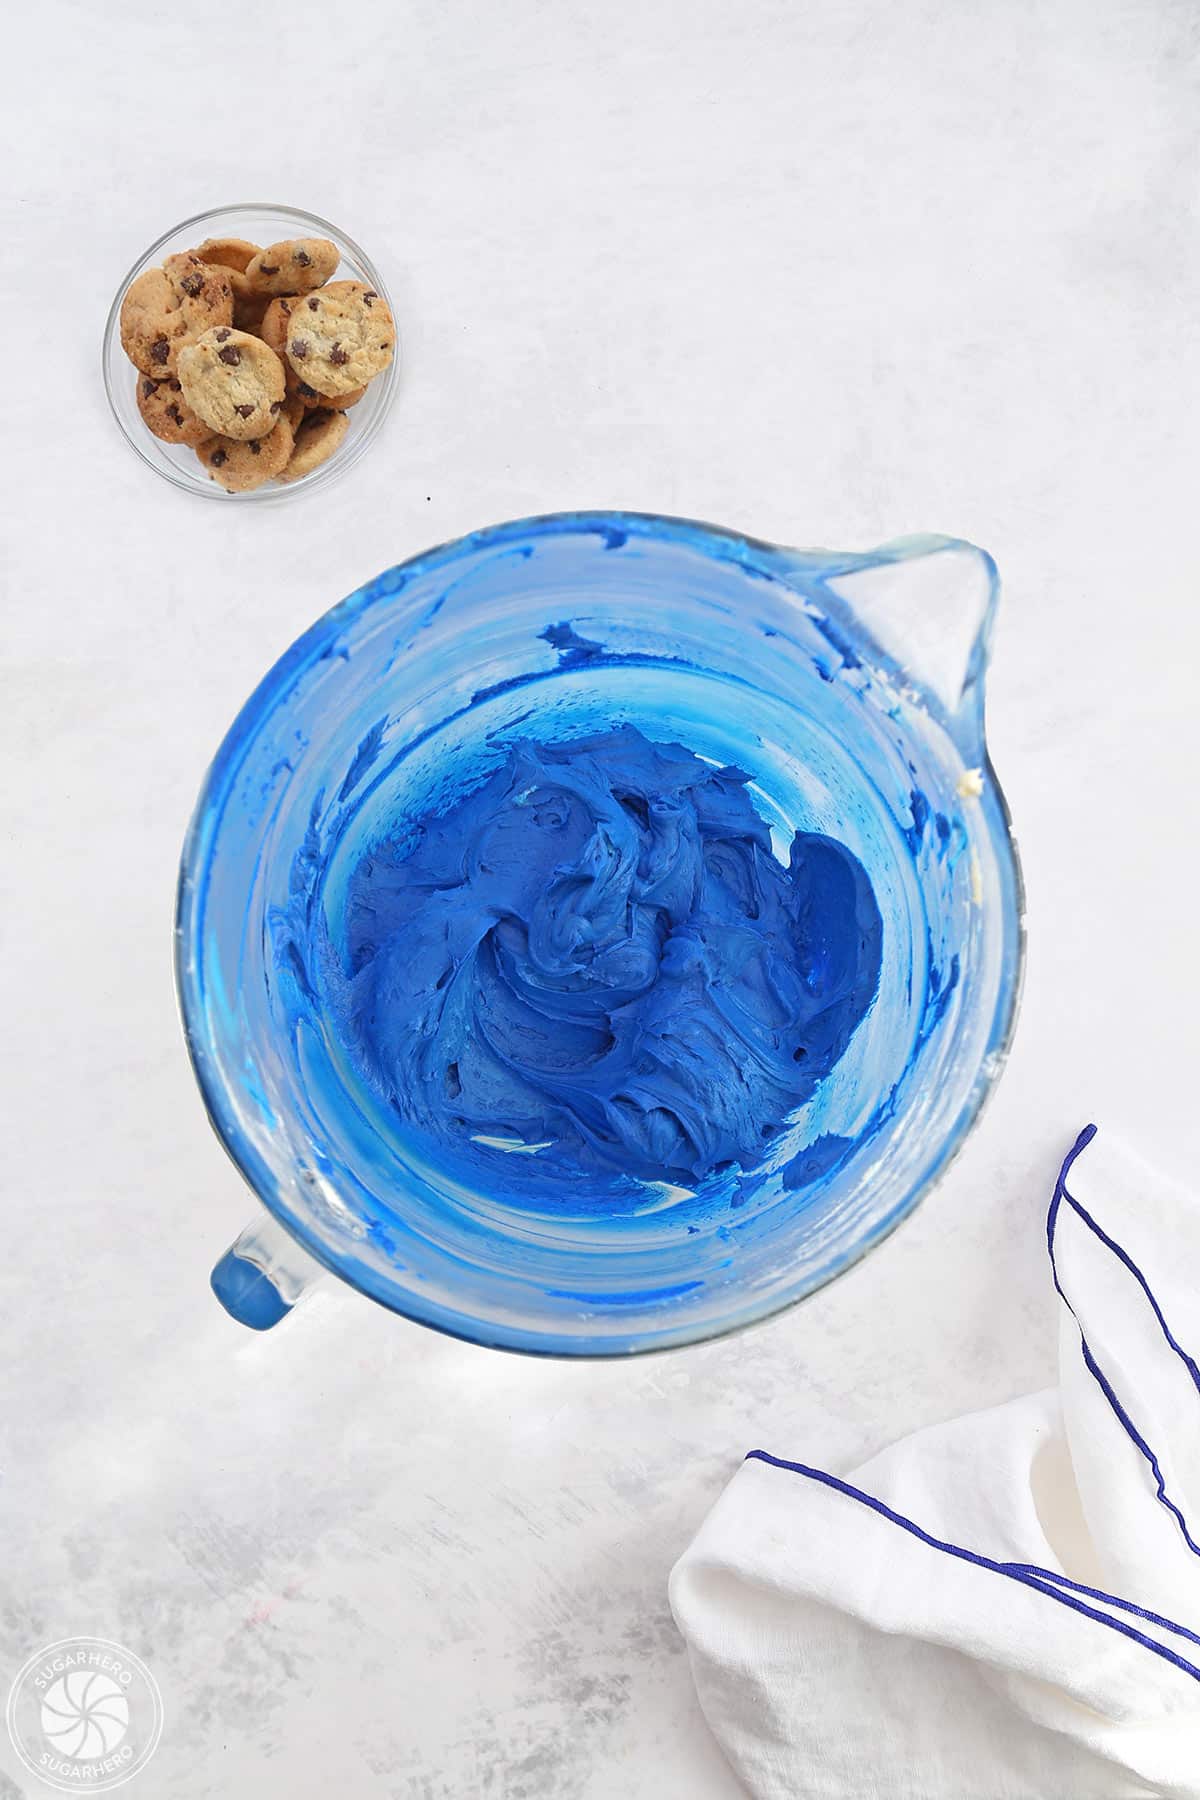 A bowl of blue frosting.